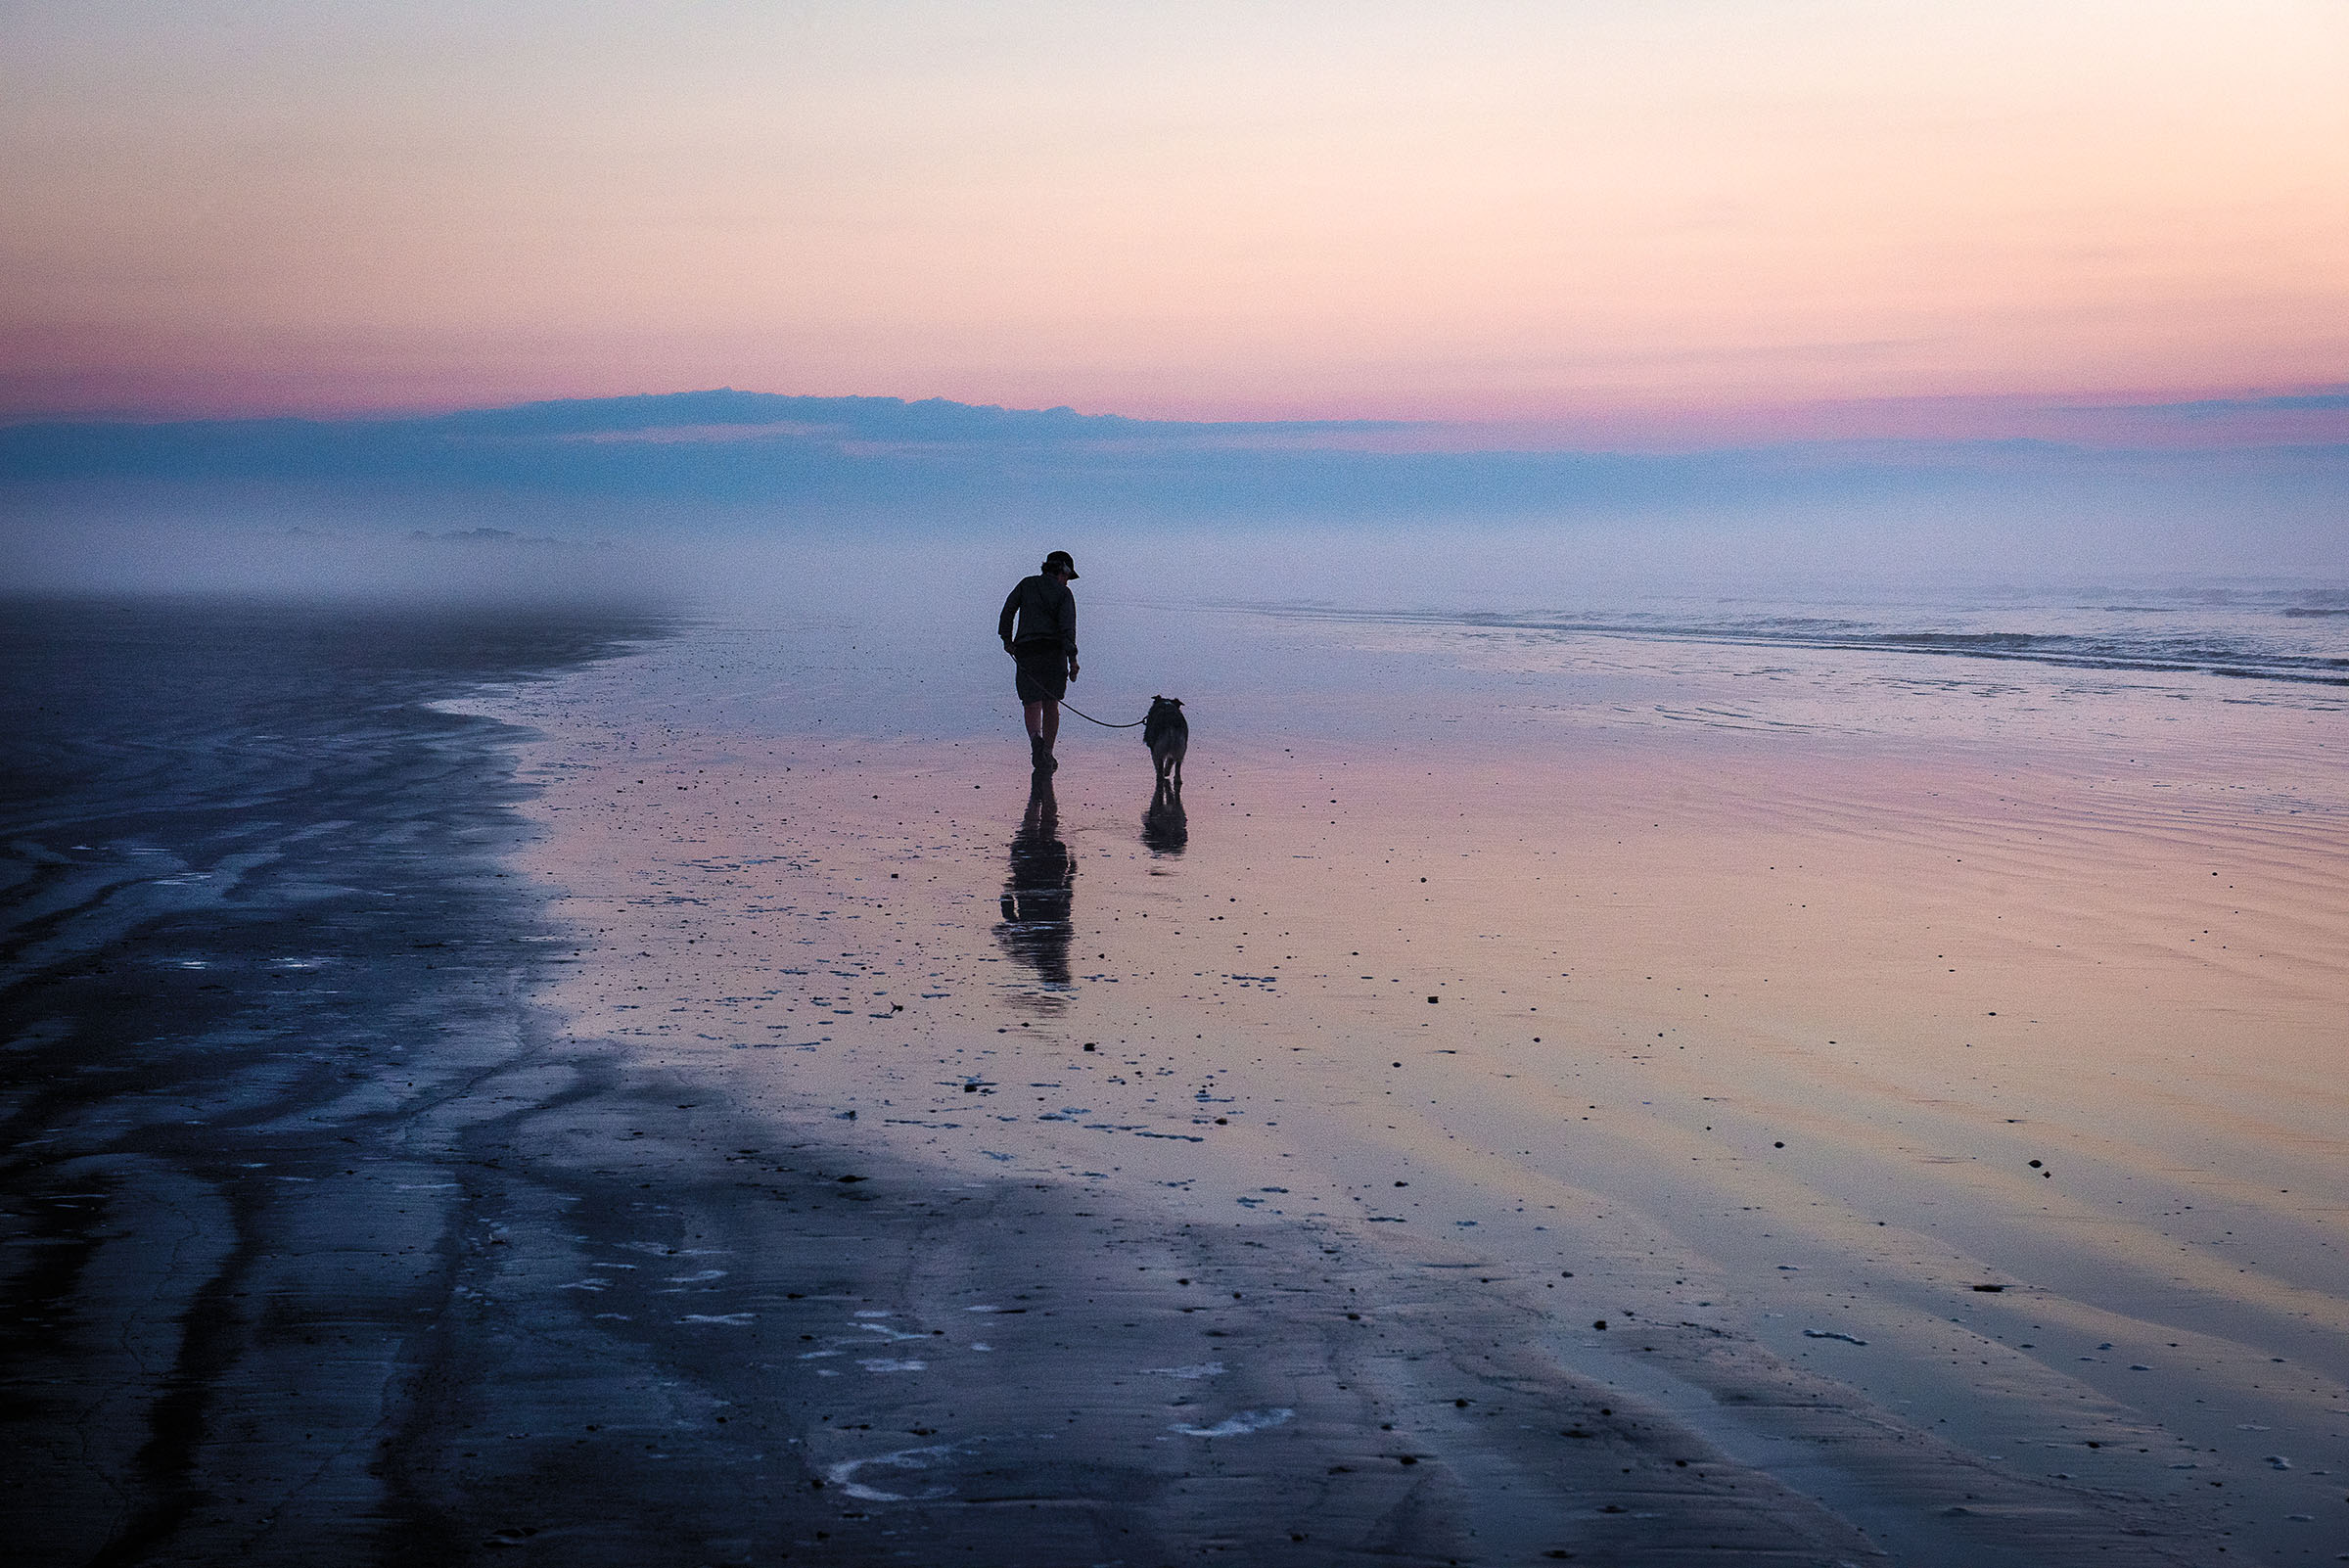 A person and a dog walk along wet sand as purple and pink light illuminate the morning sky along the sea